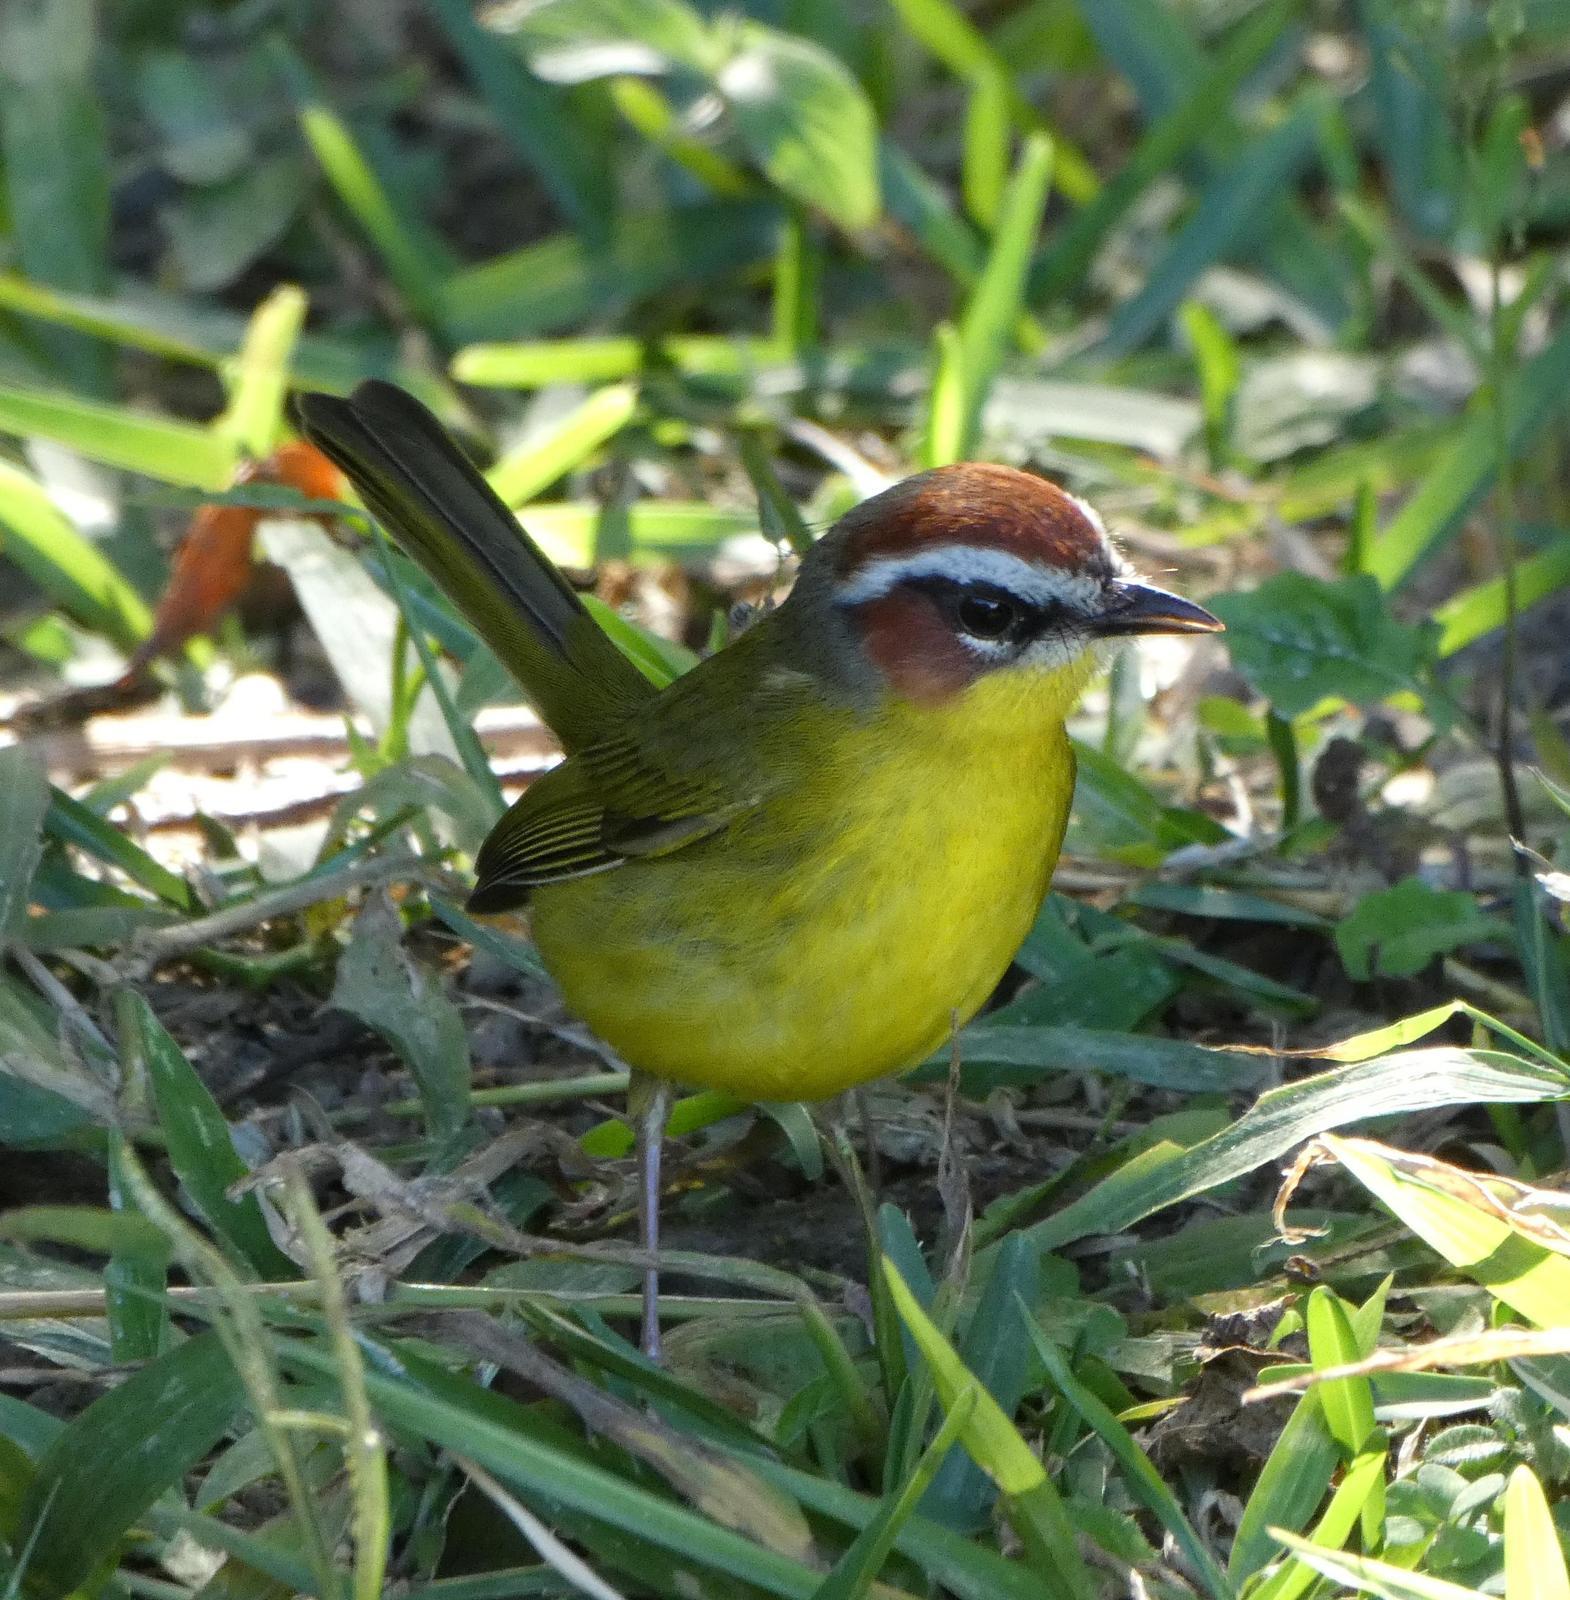 Rufous-capped Warbler Photo by Phil Ryan